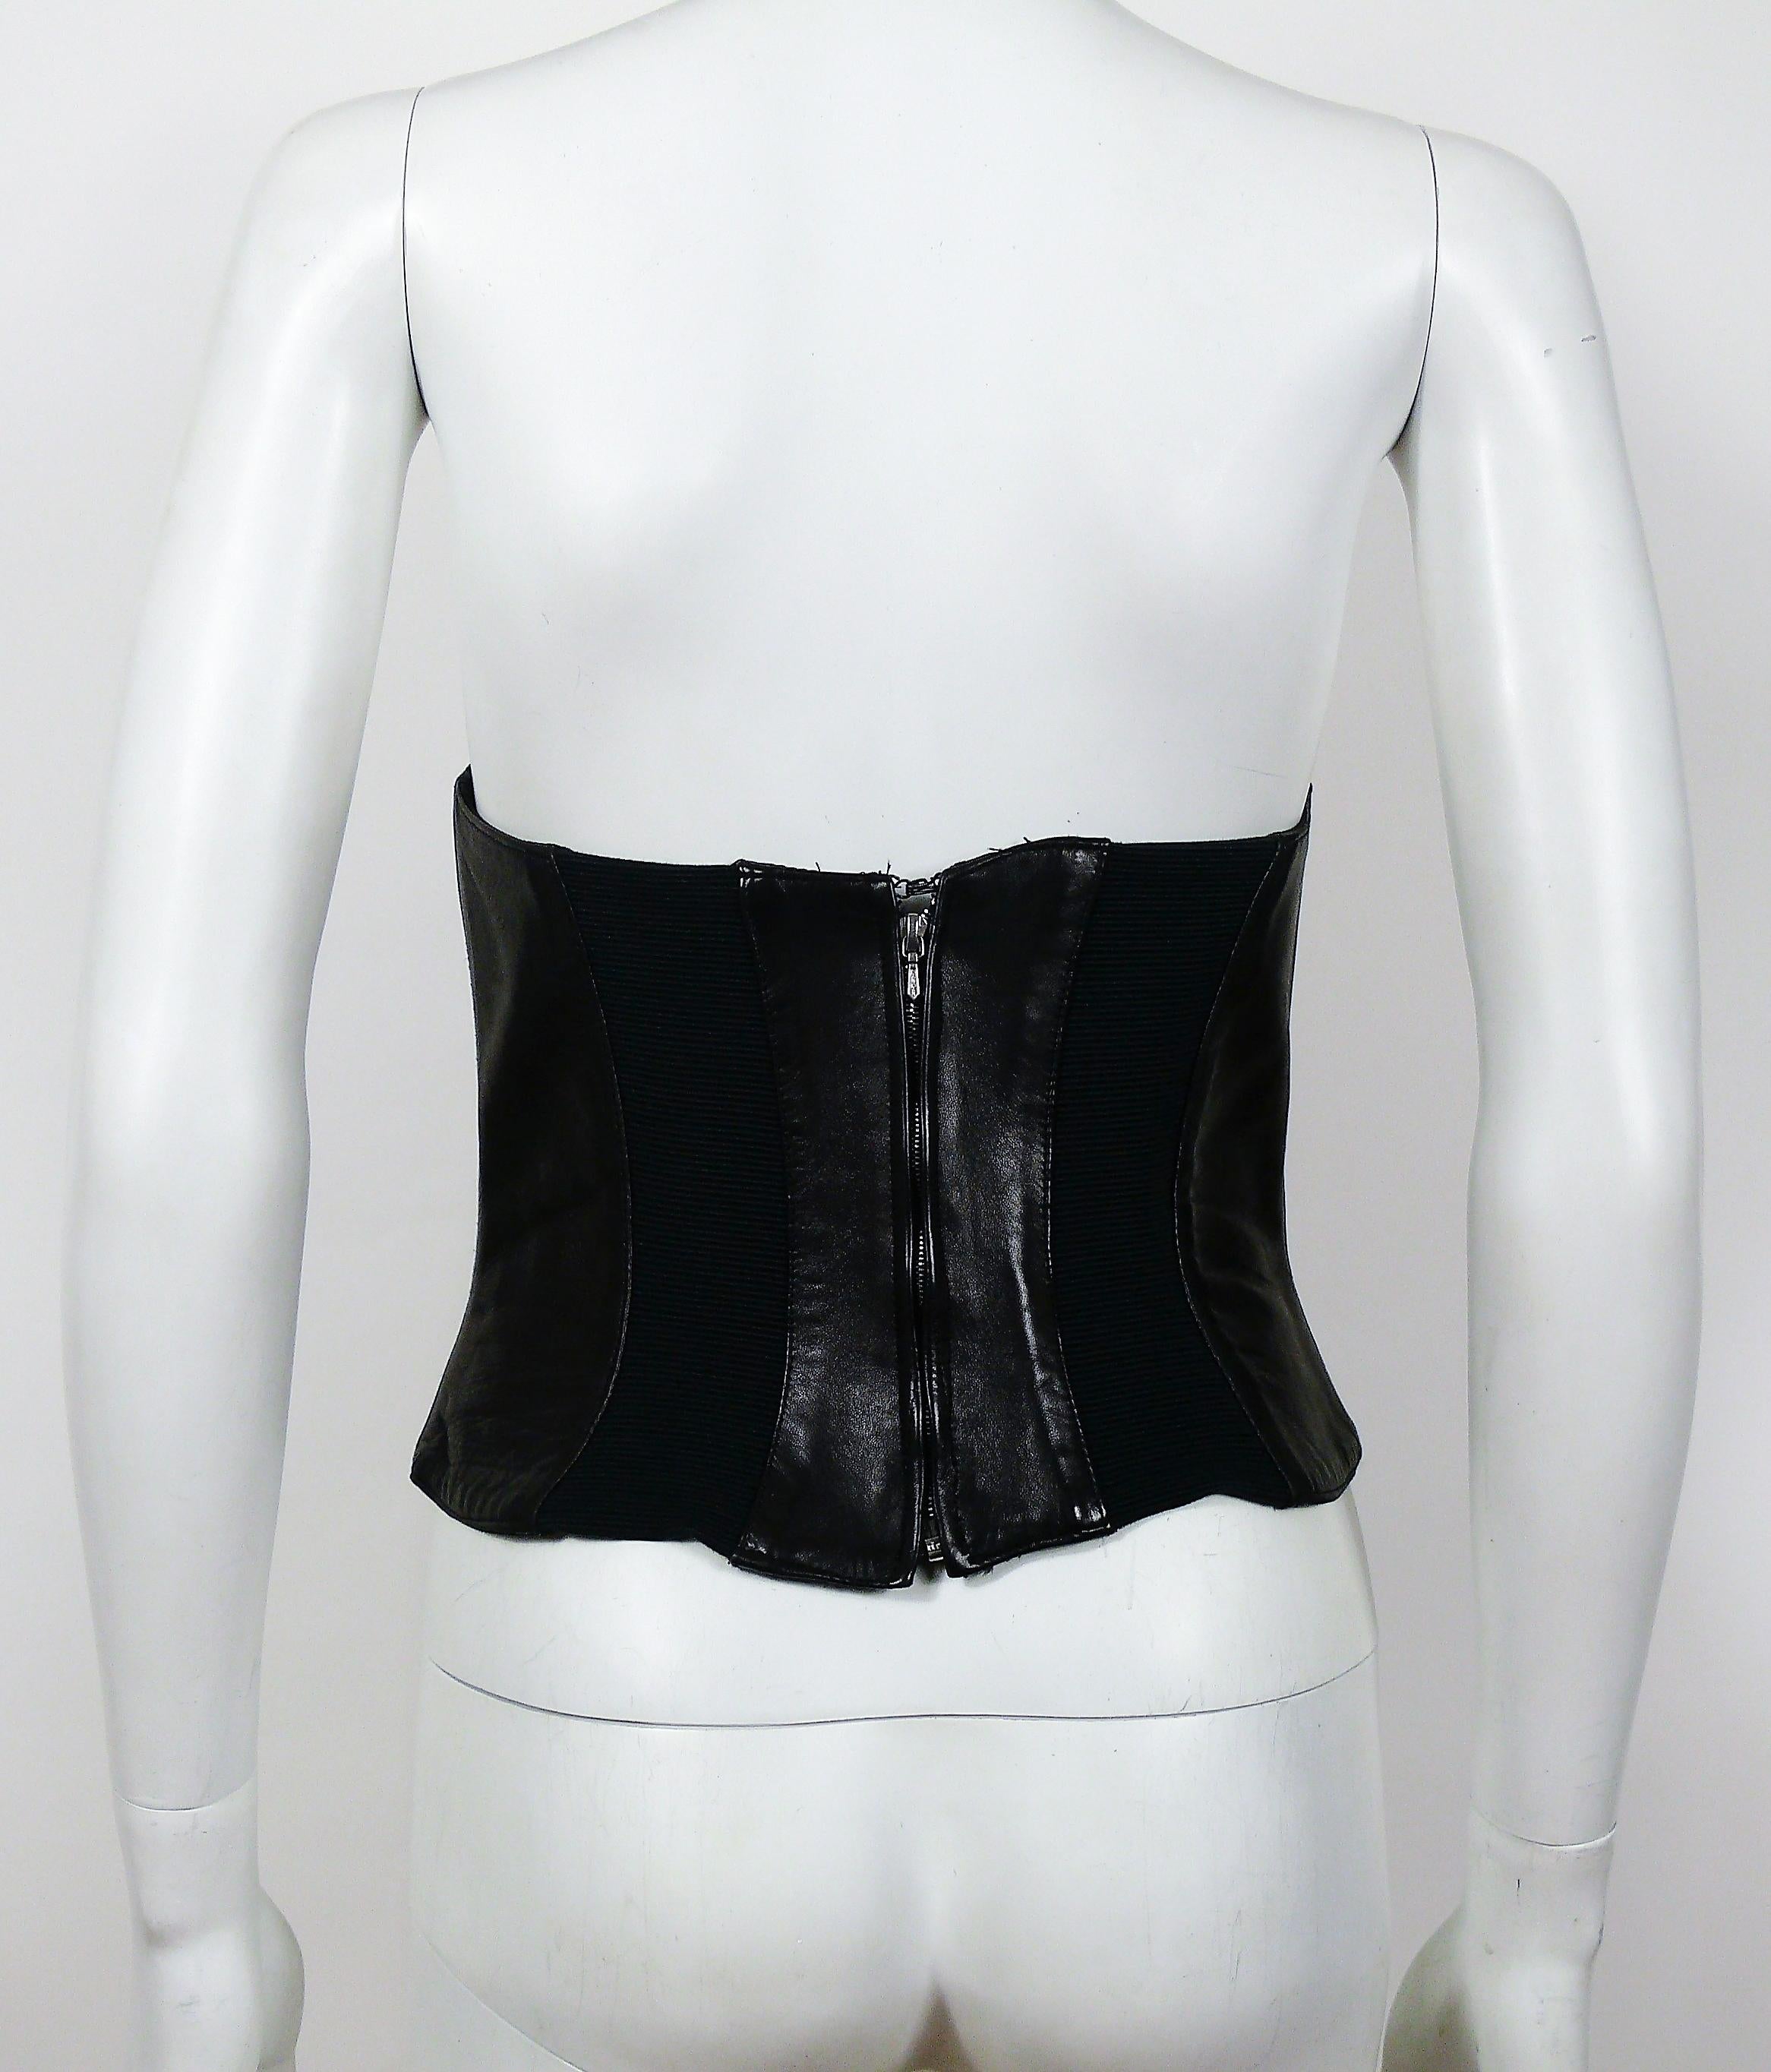 Thierry Mugler Couture Iconic Vintage Black Leather Bustier Corset 1